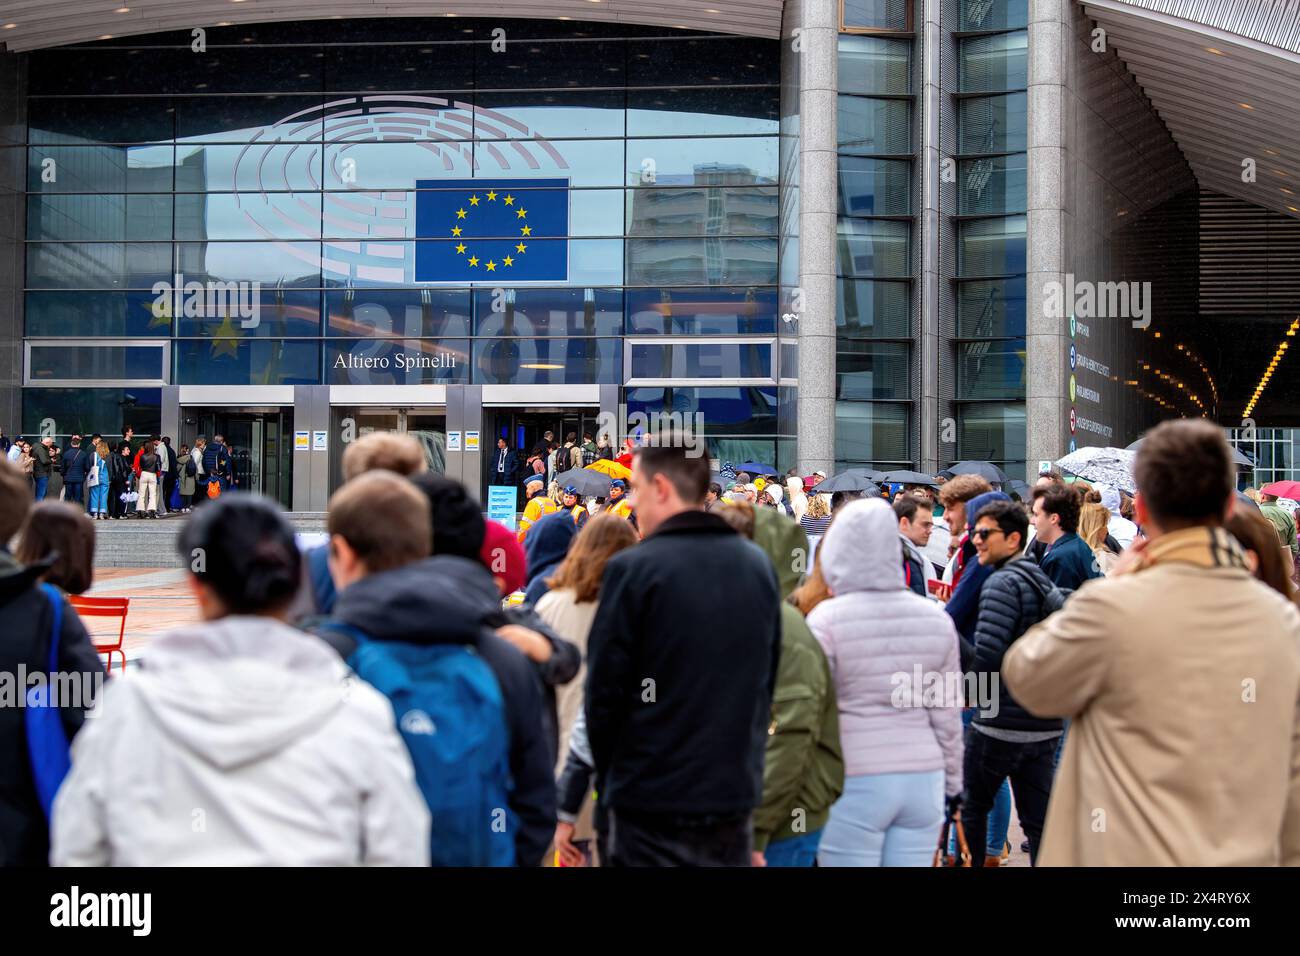 The public waits well into the afternoon for their chance to walk the halls of the EU parliament building during an open day to celebrate the birthday of the European Parliament in Brussels. Celebrating the European Parliament's birthday in Brussels, visitors gained special access to the Parliament chambers and the iconic building itself. The open day featured informative stands on the upcoming European Parliament elections, fostering political engagement and dialogue. Against the backdrop of European democracy, attendees immersed themselves in the legislative process, symbolizing transparenc Stock Photo